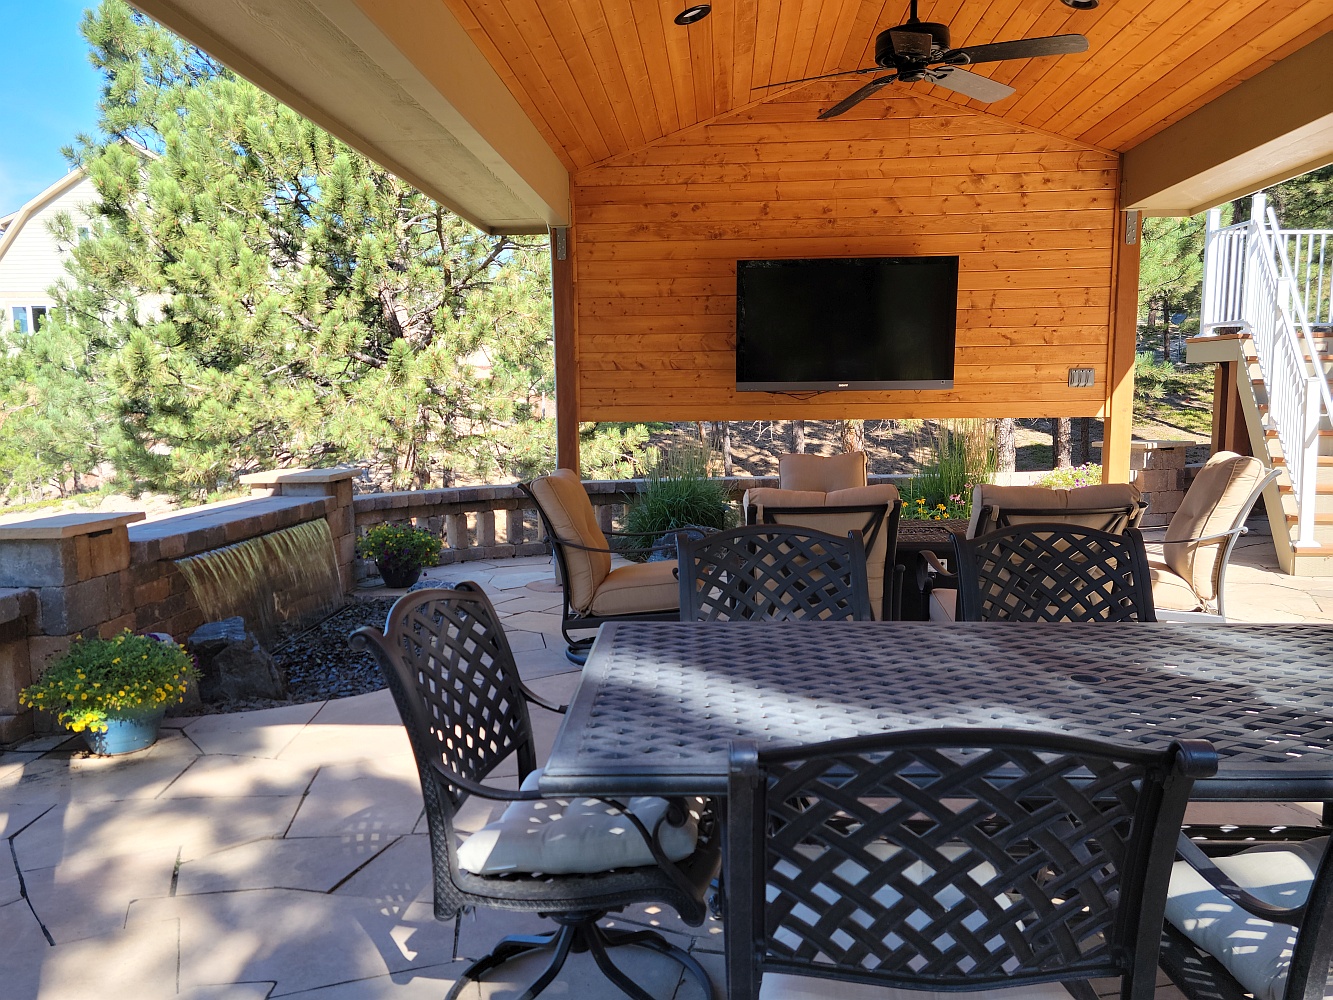 Patio cover with tv mounted on cedar half-wall